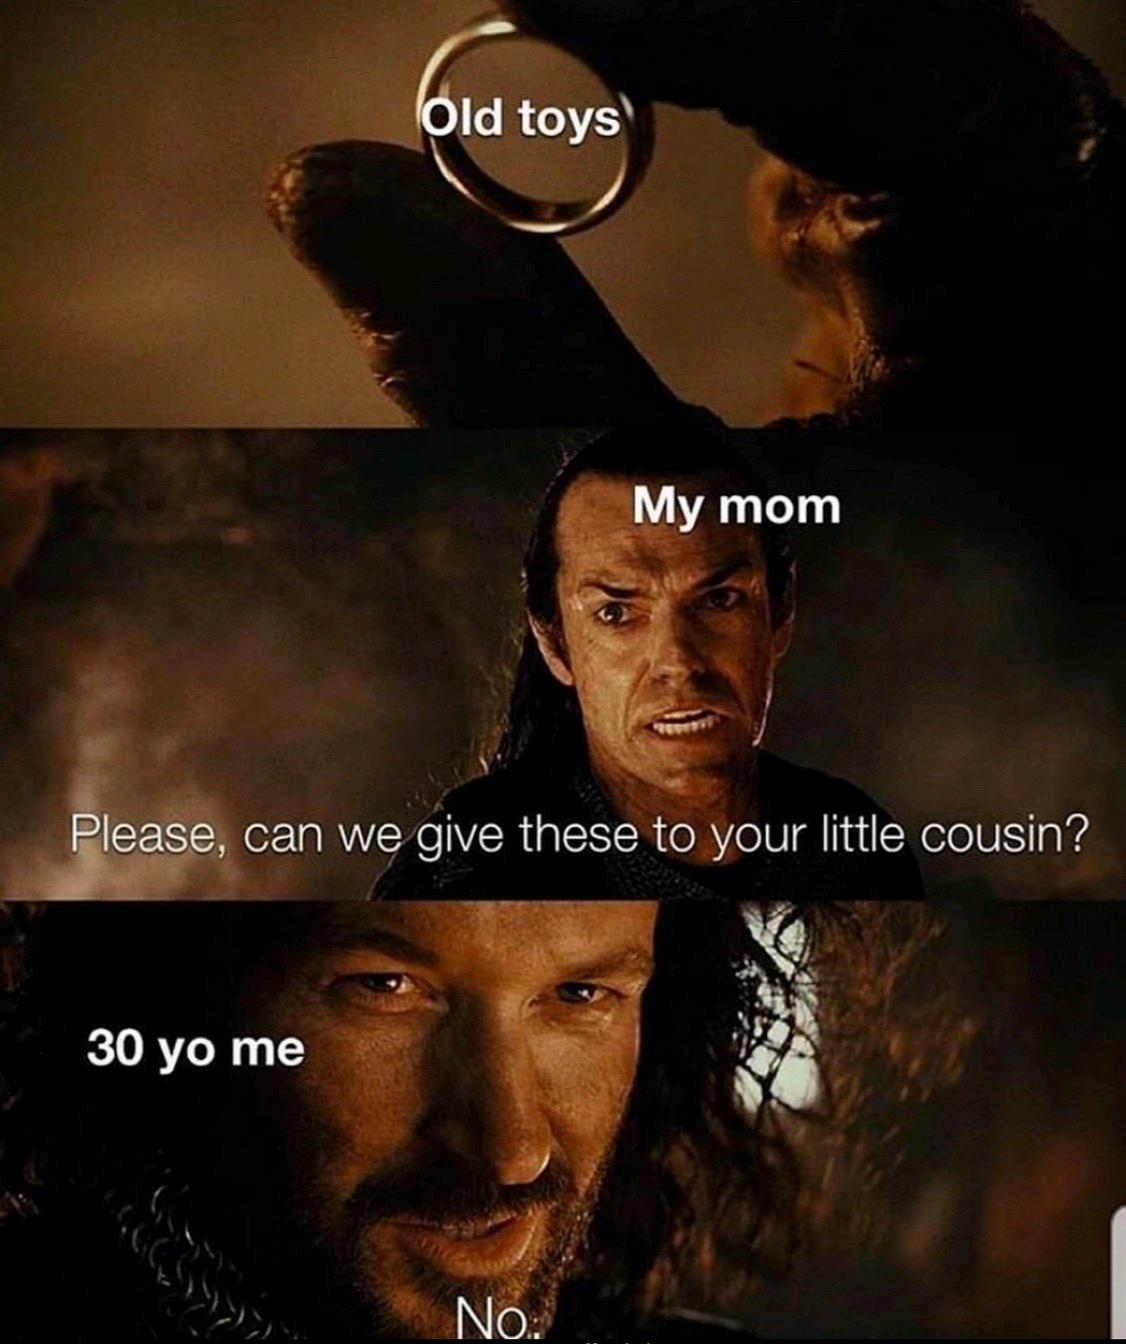 lord of the rings meme template - Old toys My mom Please, can we give these to your little cousin? 30 yo me No